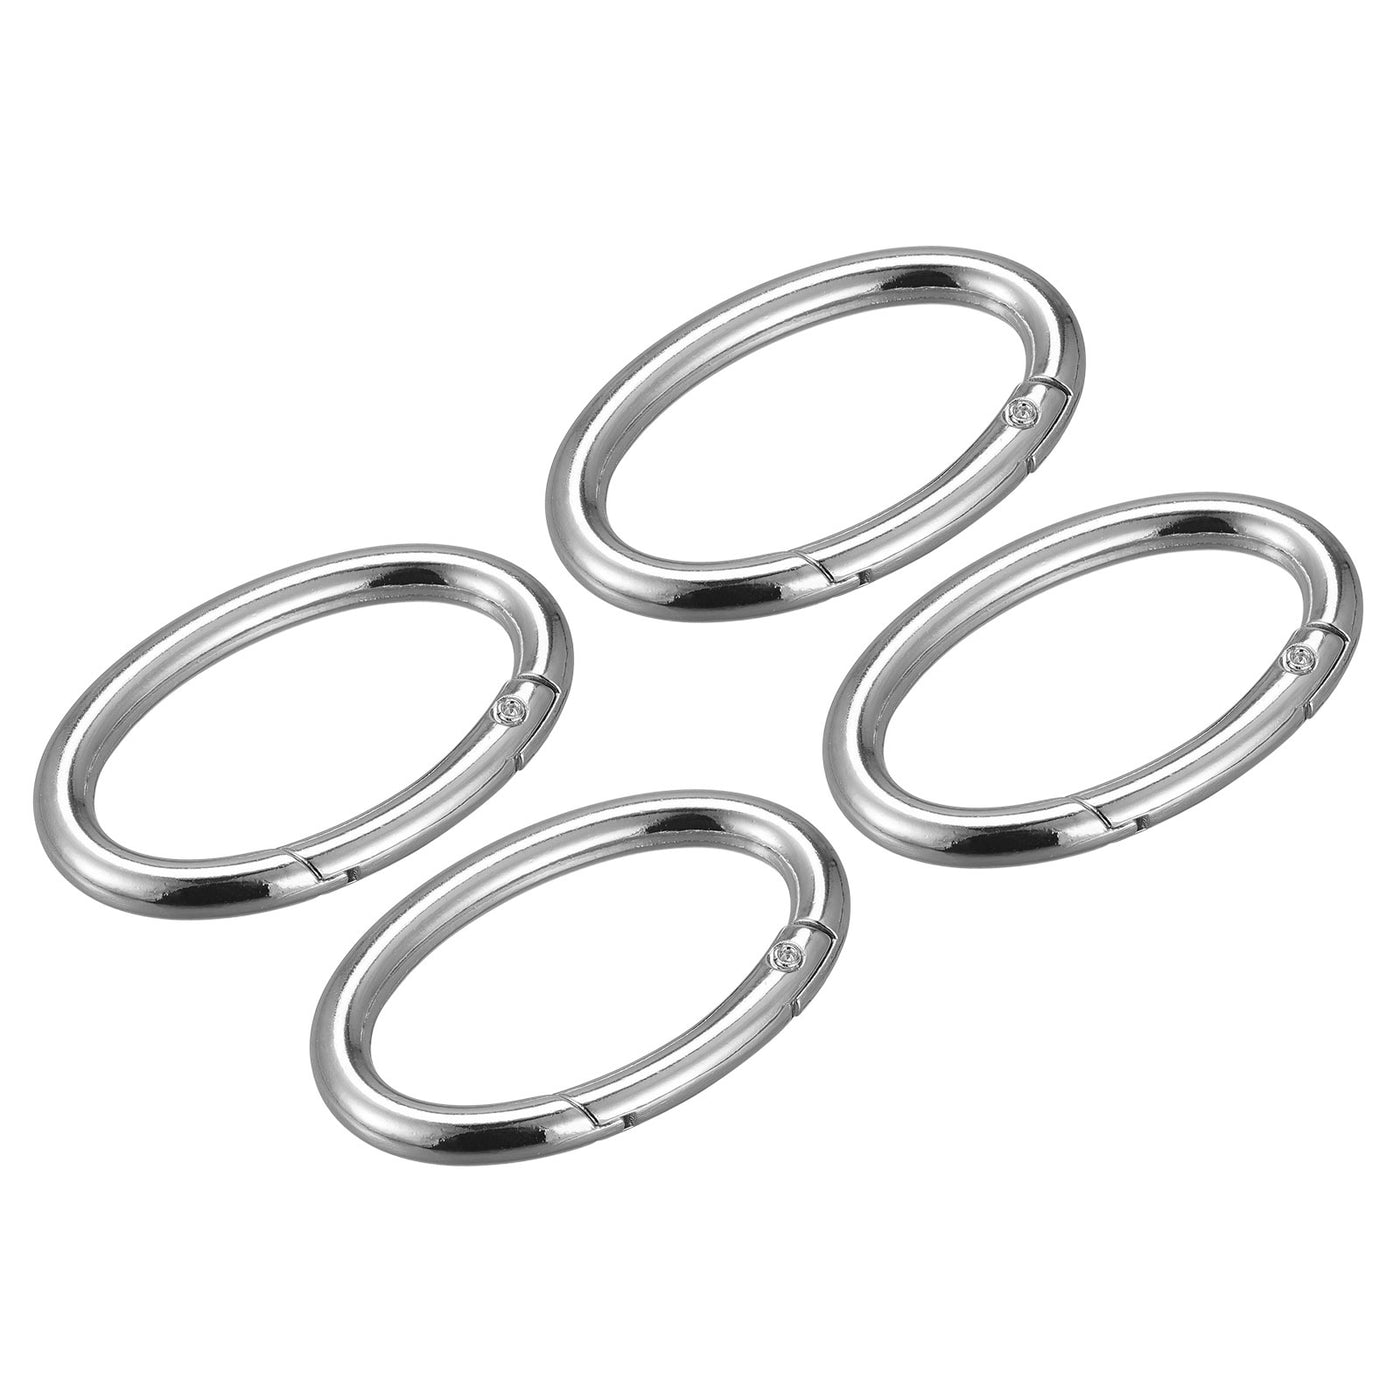 uxcell Uxcell 1.85 Inch Spring Oval Ring Snap Clip Trigger for Bag Purse Keychain, 4Pcs Silver